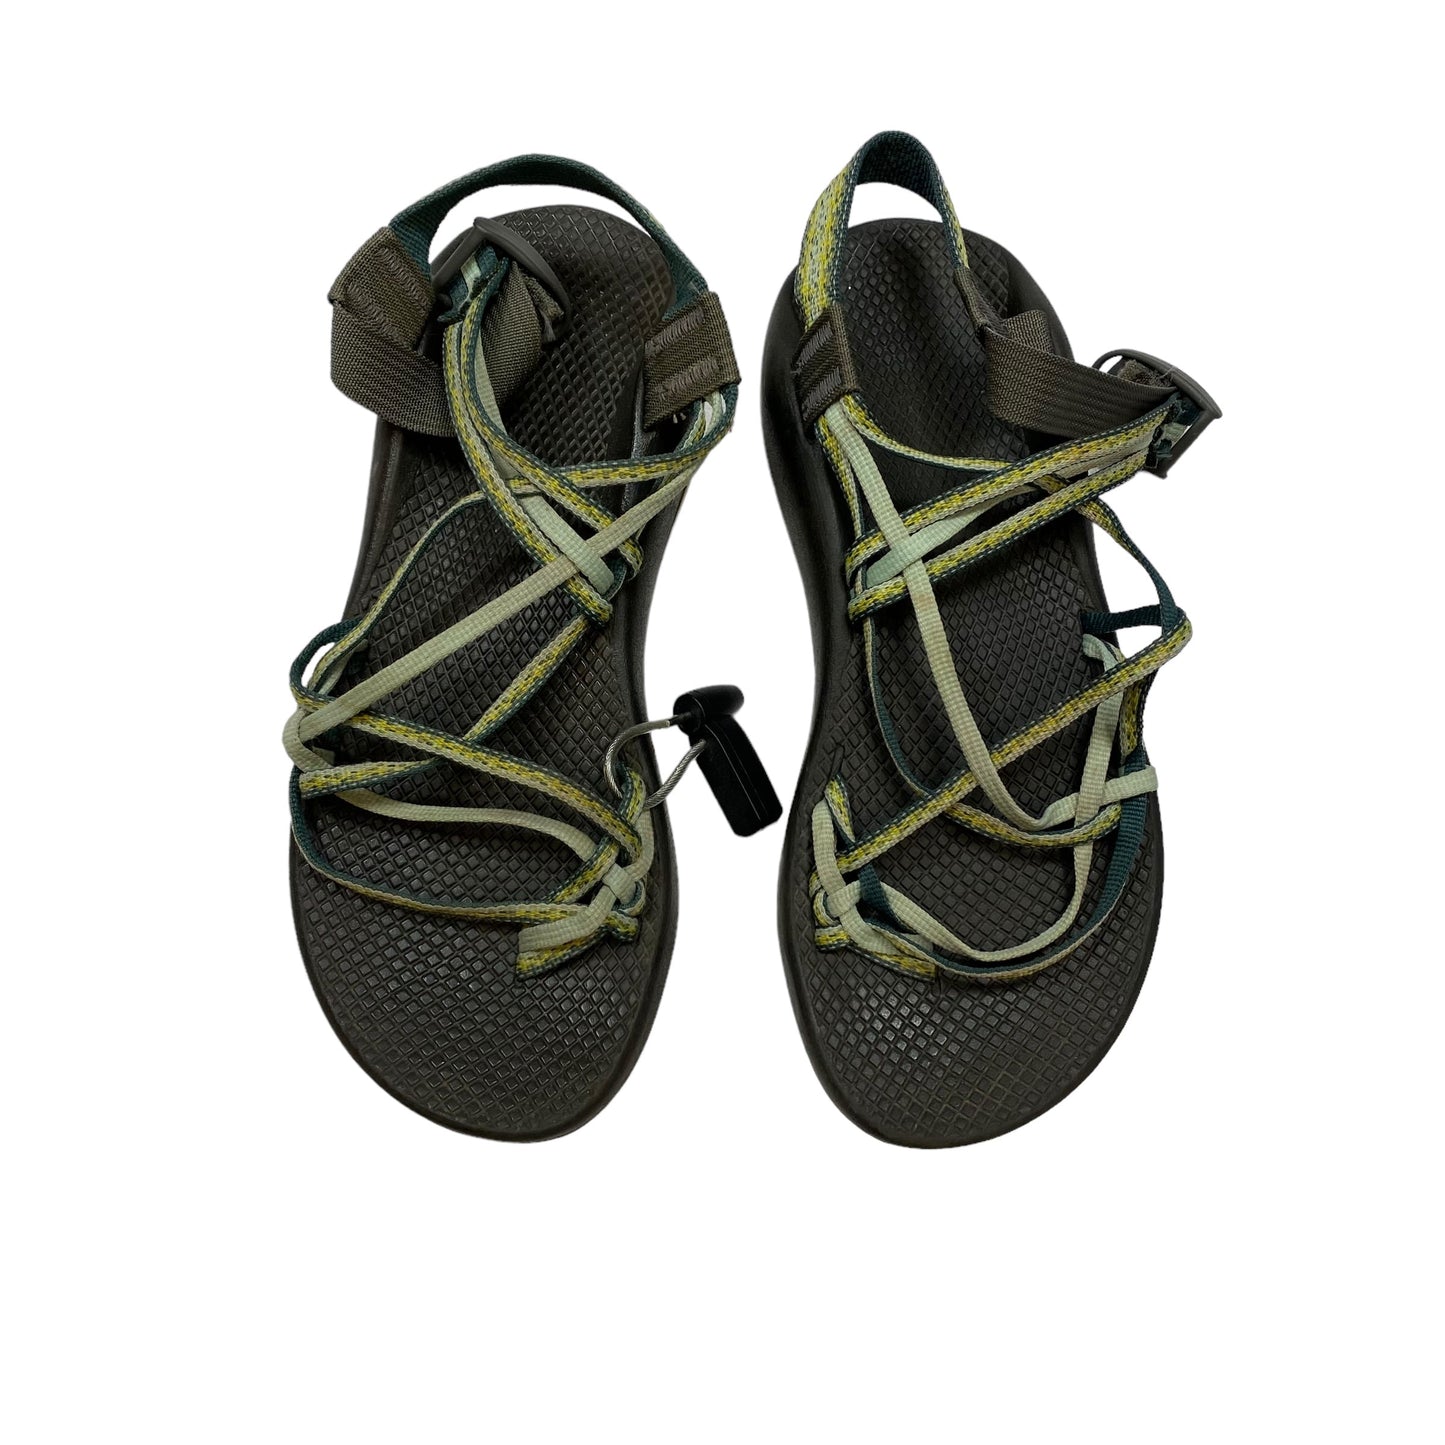 Green Sandals Sport Chacos, Size 9